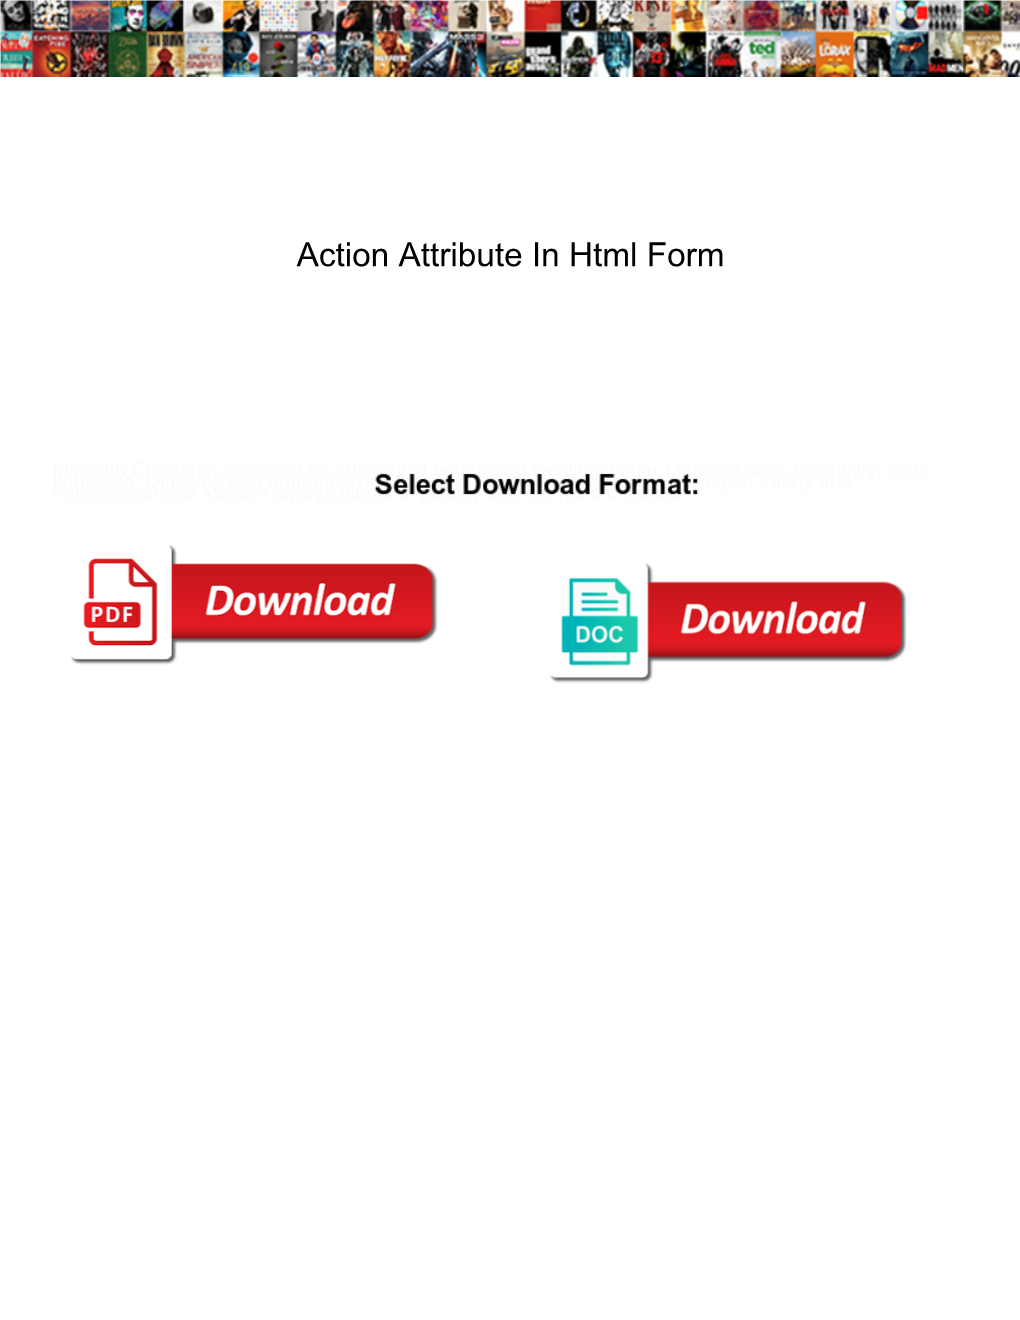 Action Attribute in Html Form